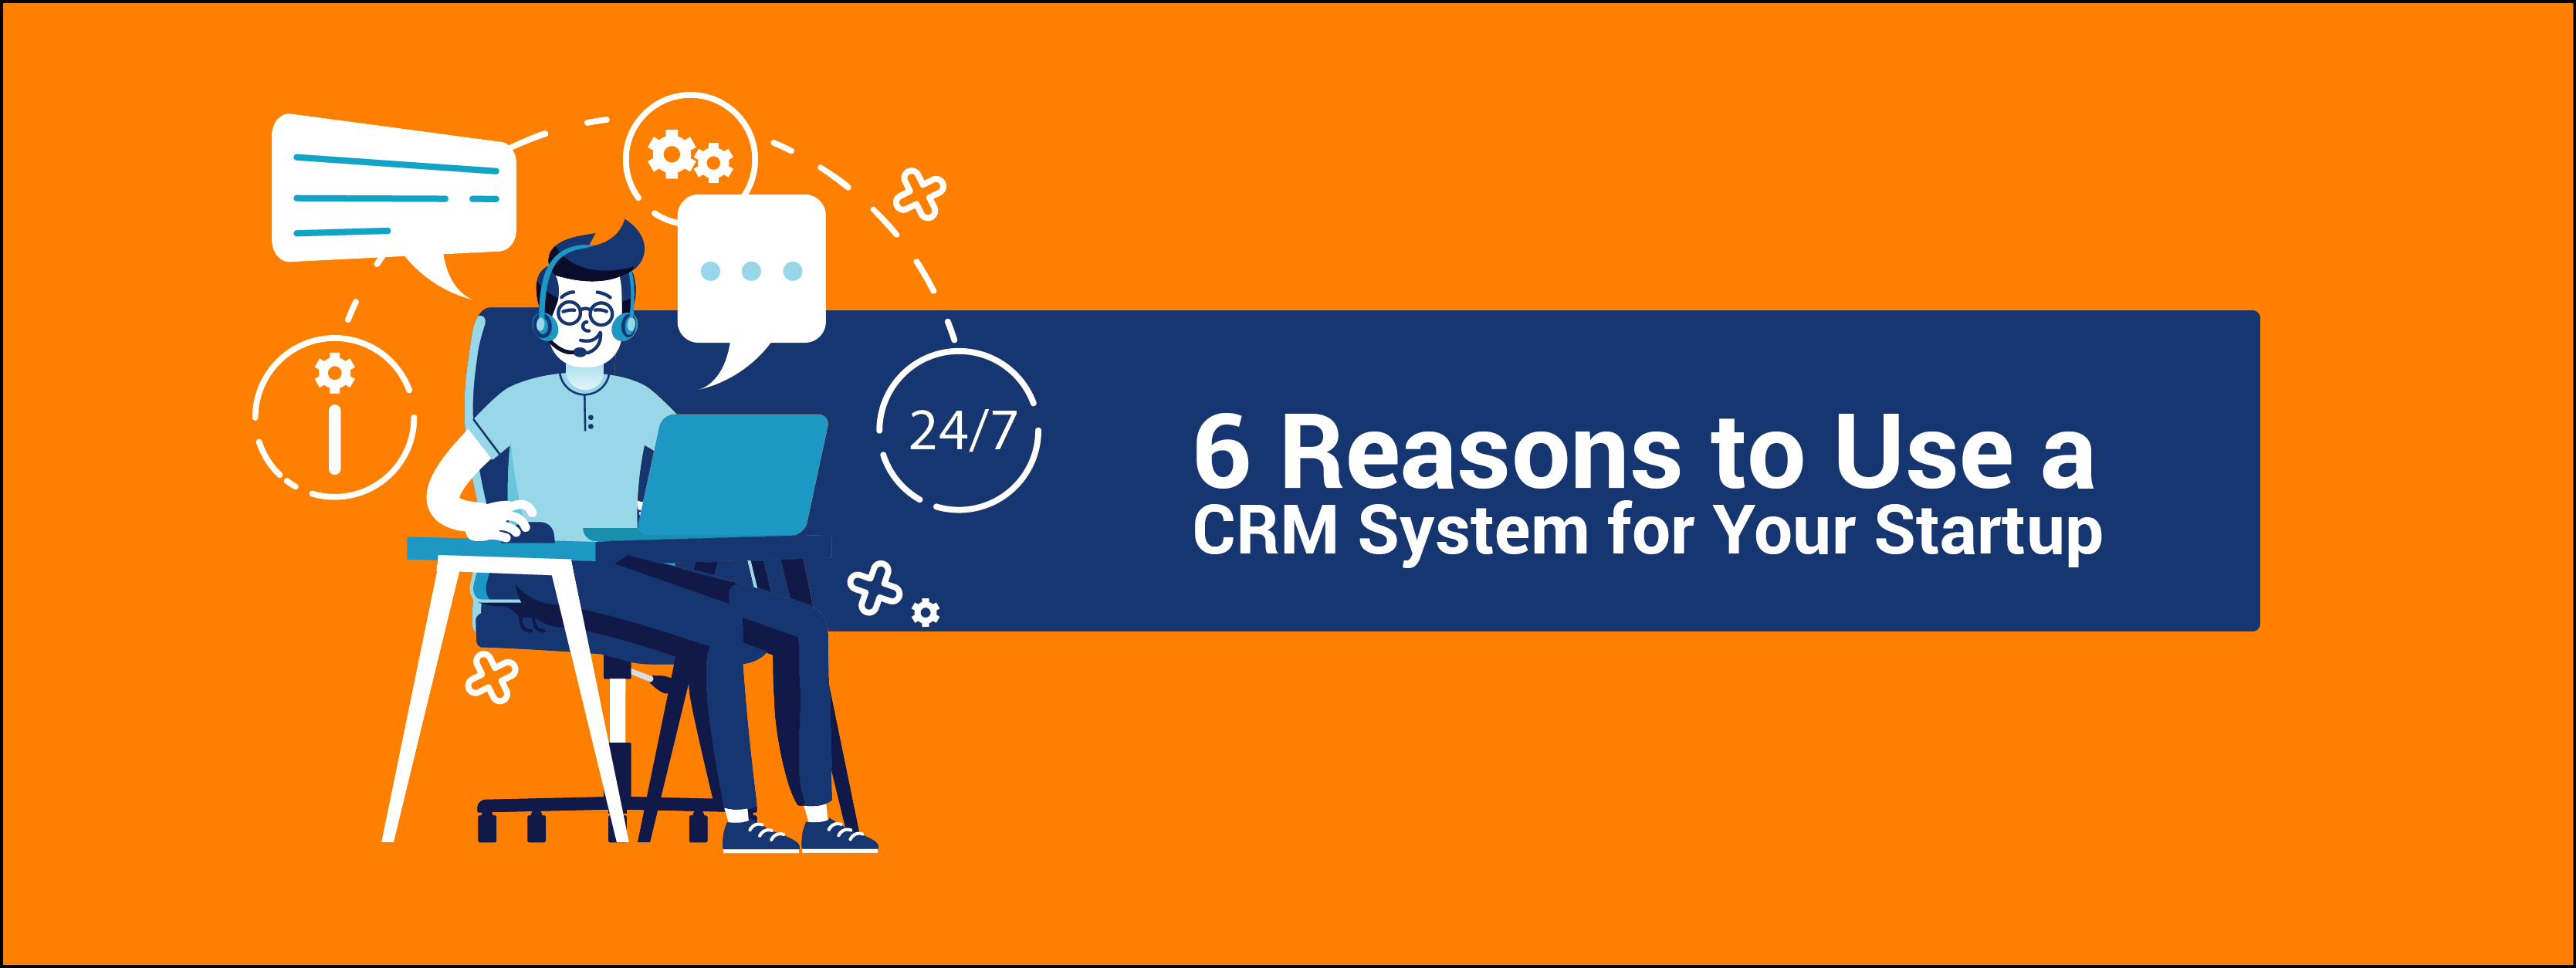 6 reasons to use a crm system for your startup